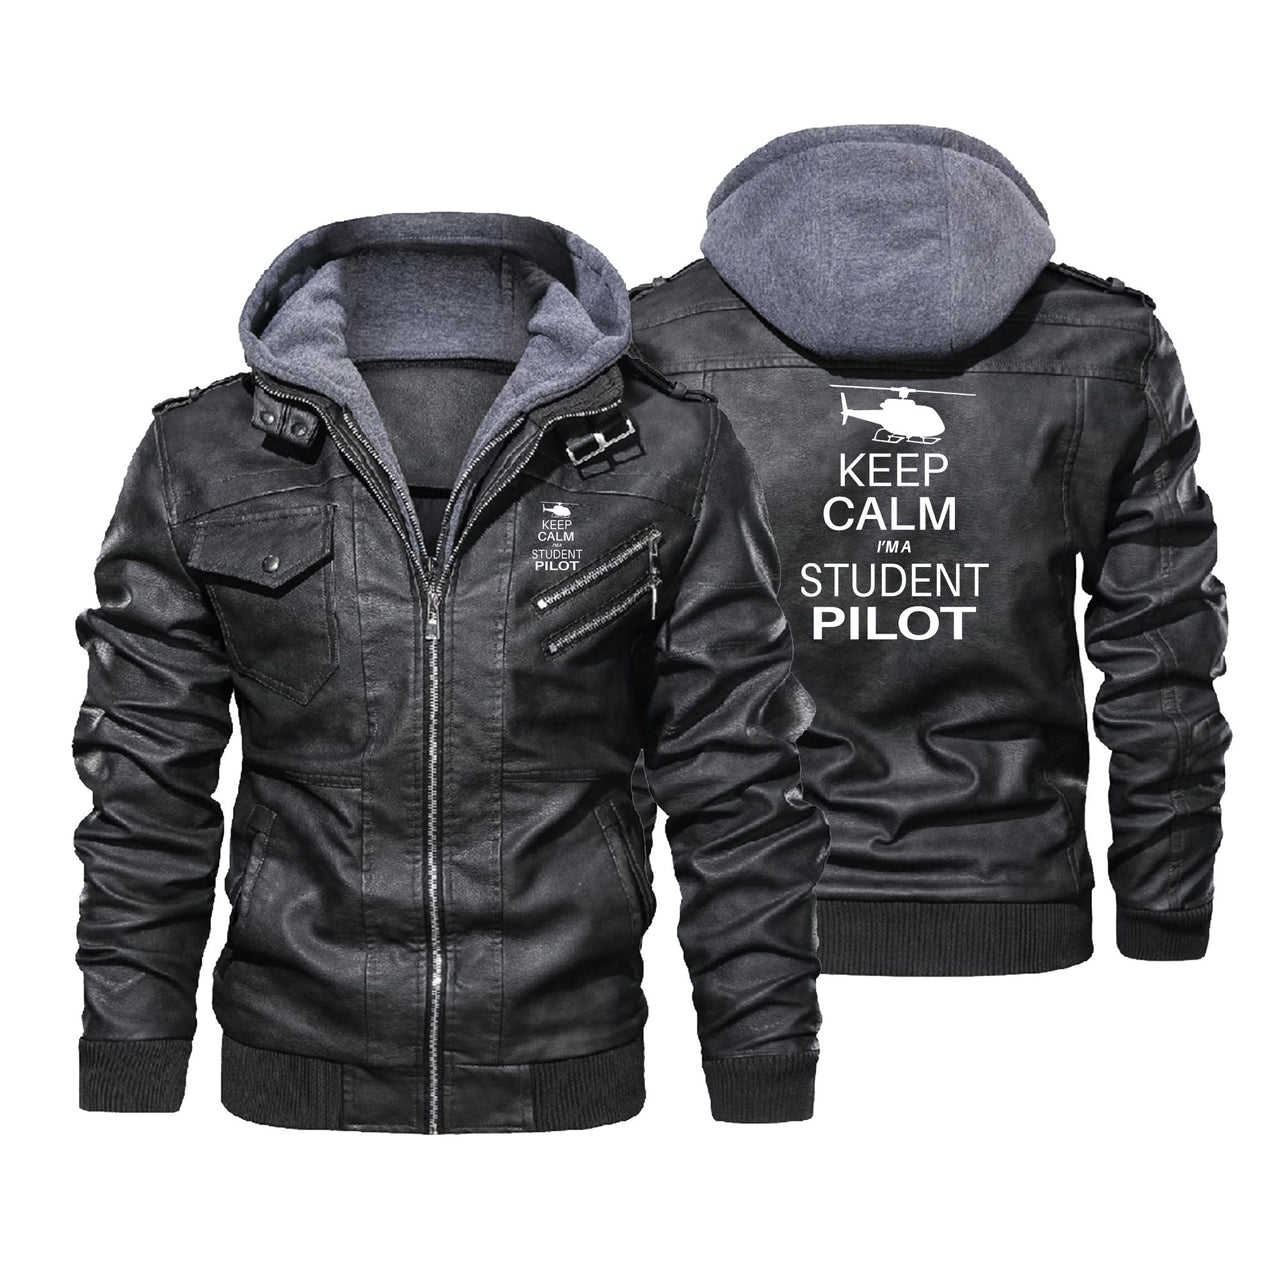 Student Pilot (Helicopter) Designed Hooded Leather Jackets